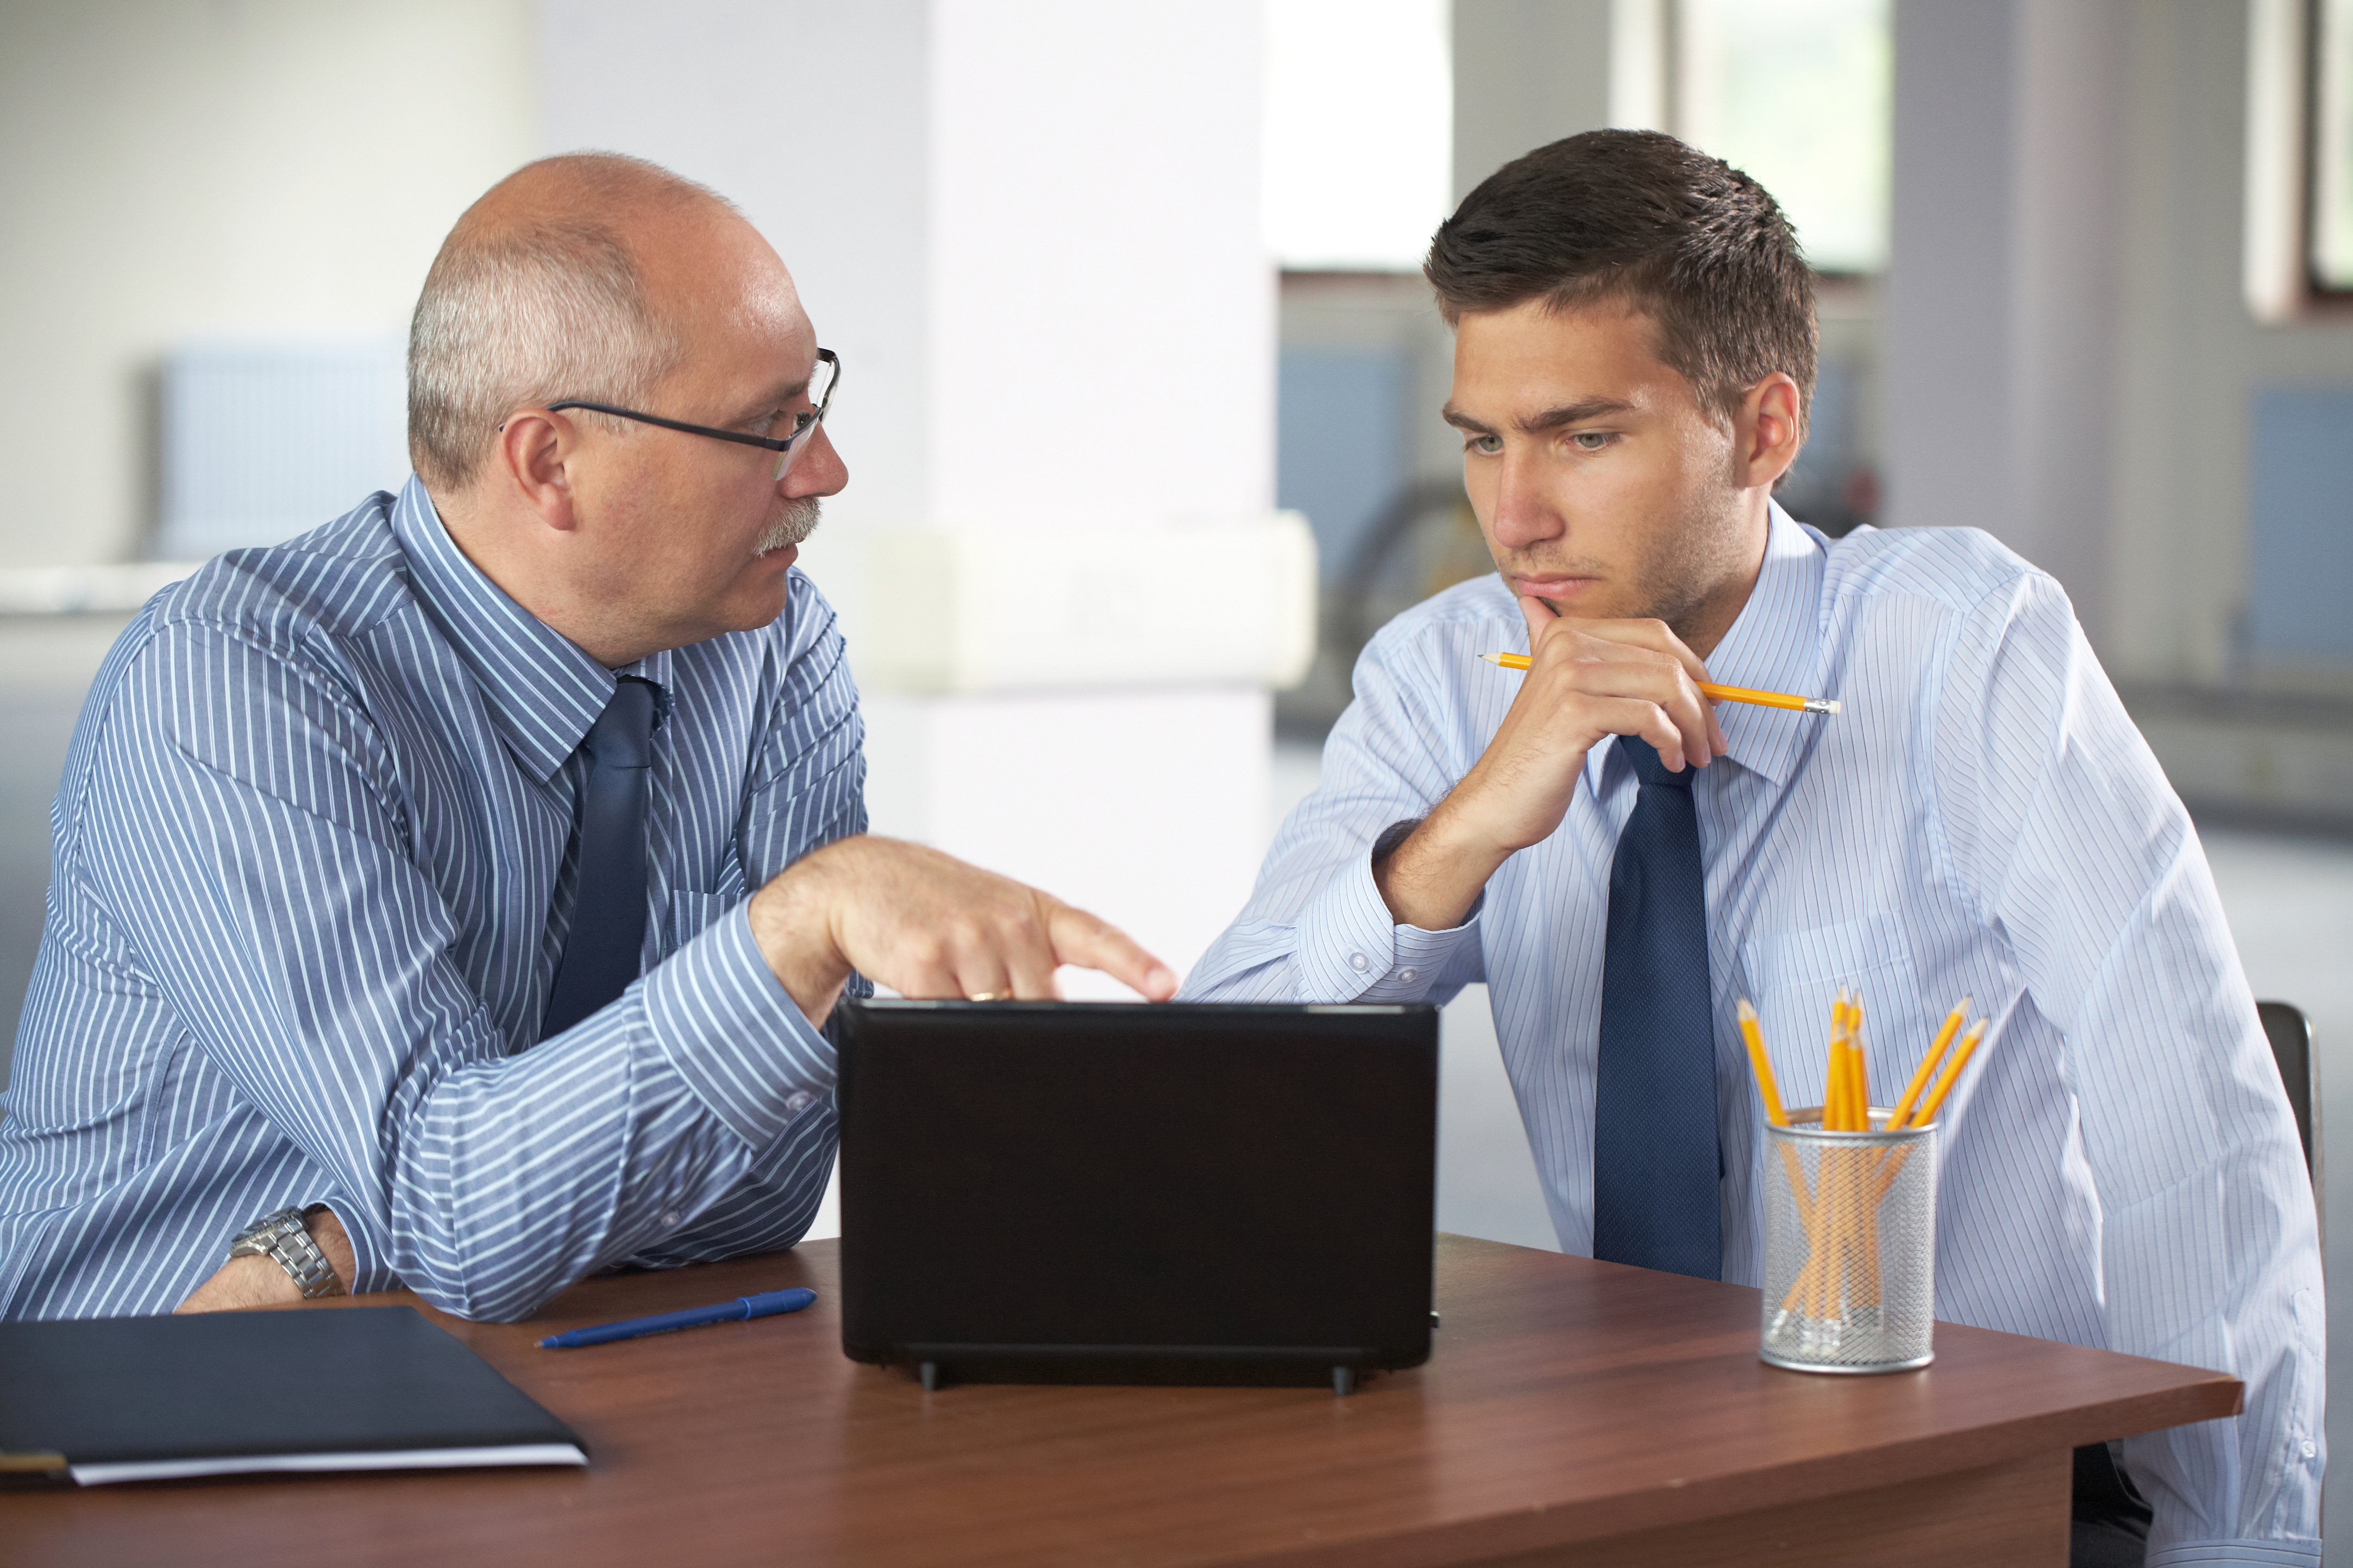 Older man pointing at an open laptop talking to younger man